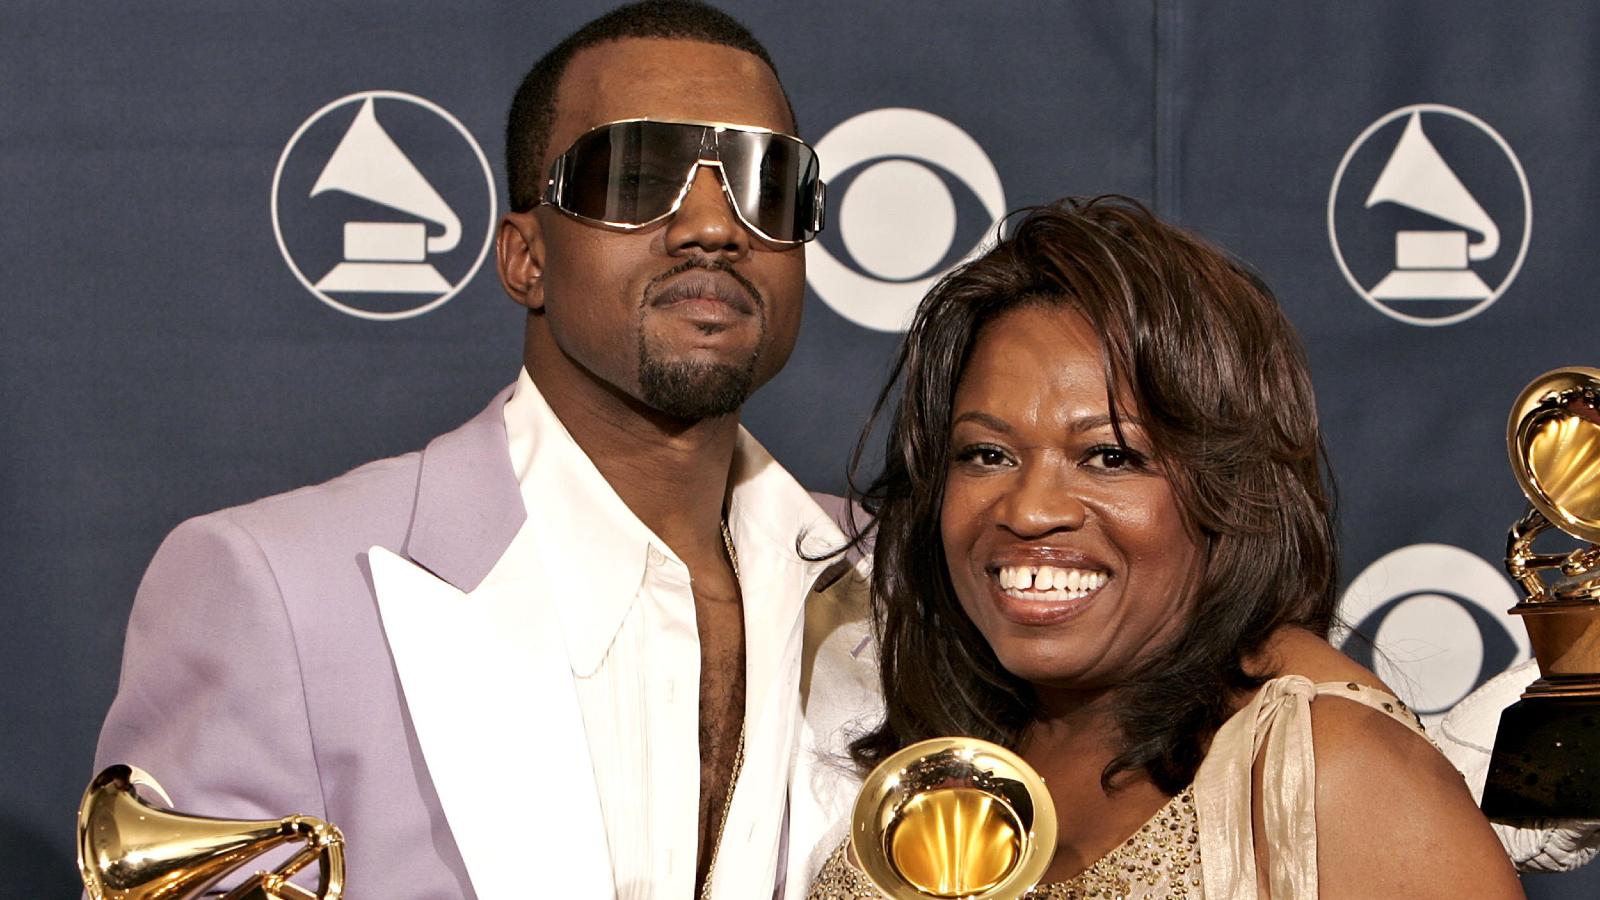 Kanye West with his late mother, Donda West